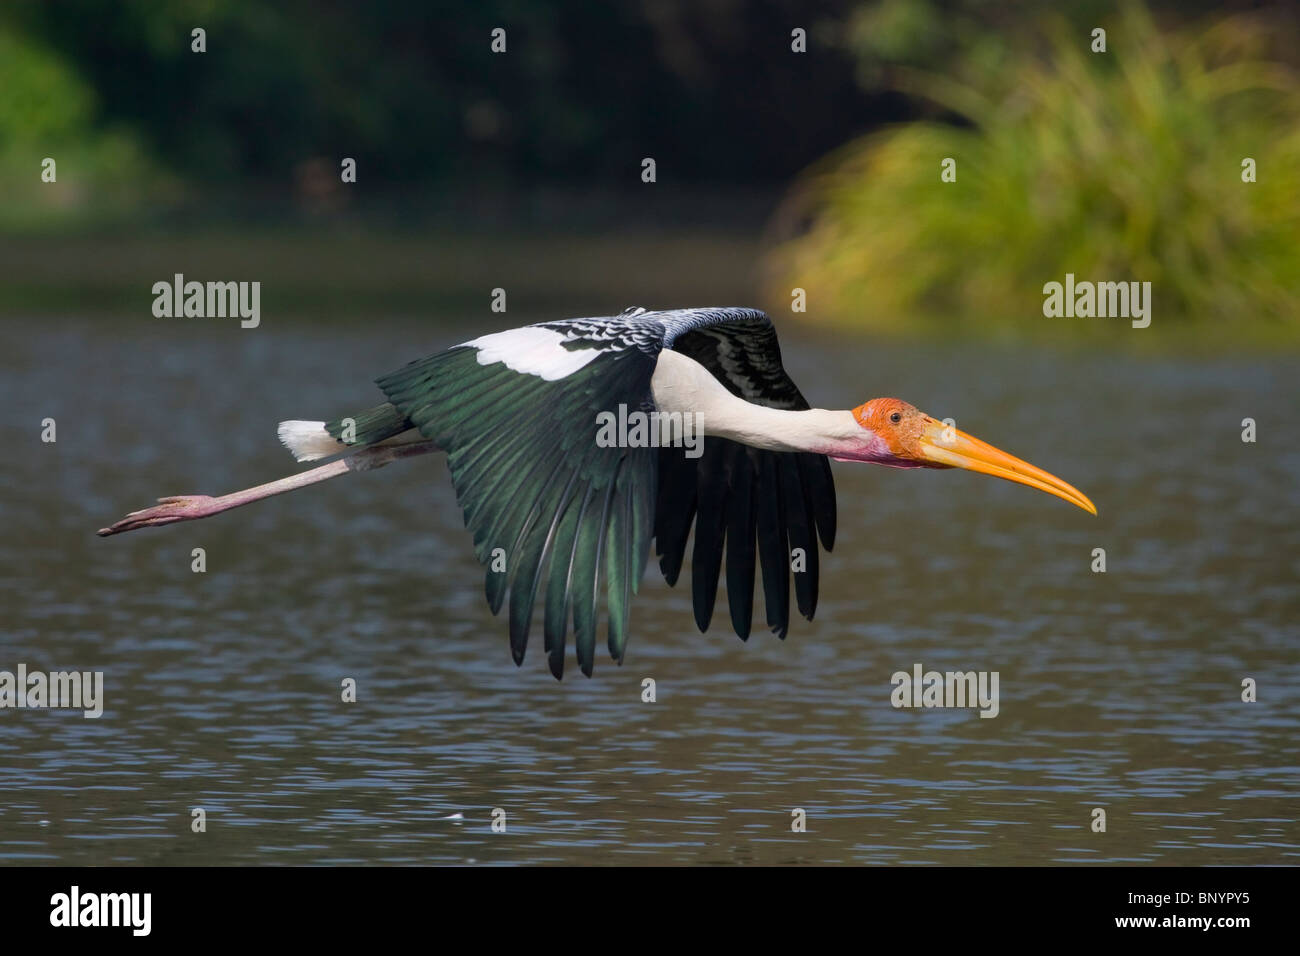 Painted Flight,Stork,Up In the air,Body wingspan,depth of field,waterBirds,Flight,India,wildlife, nature,predator,prey,on the go Stock Photo